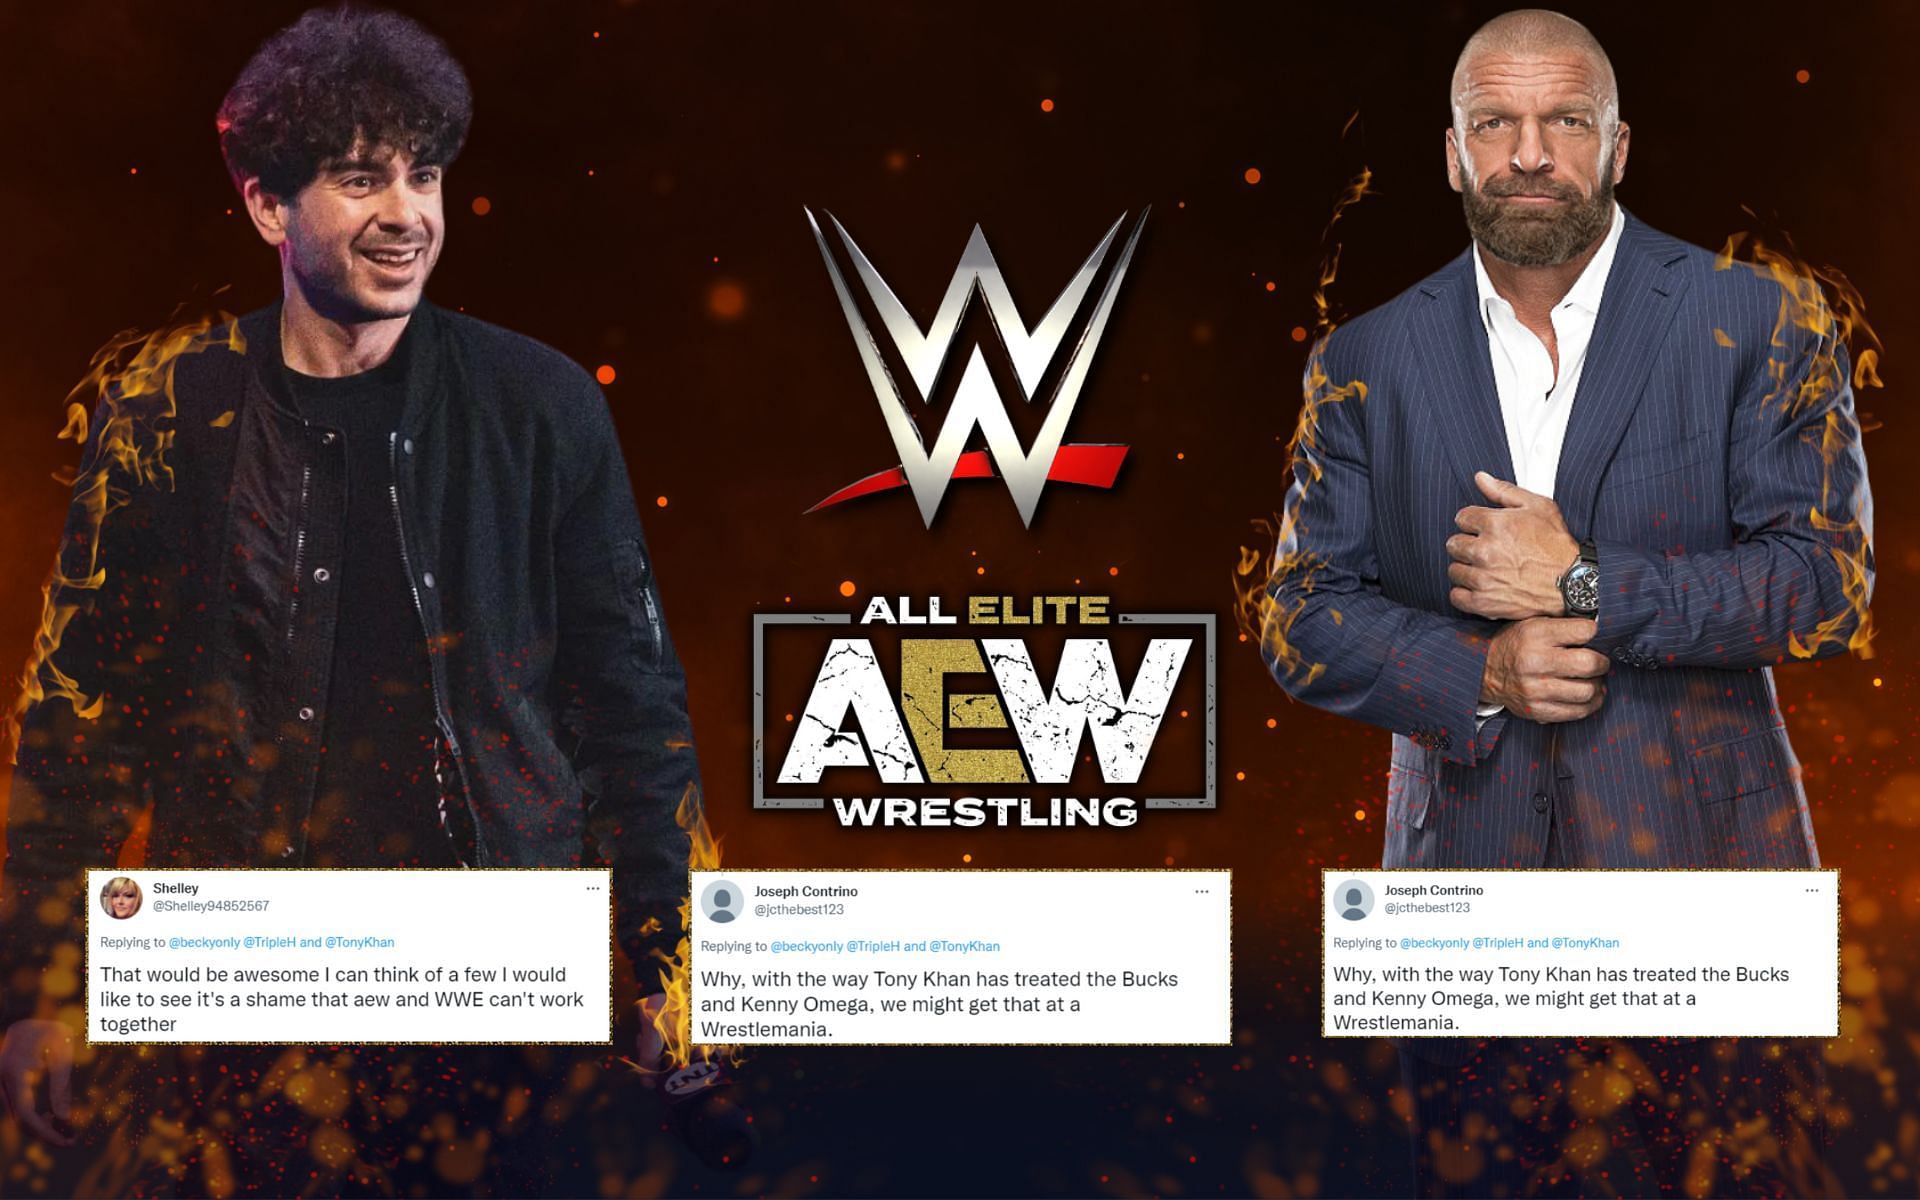 The tension between Tony Khan and Triple H has been brewing over the past few years